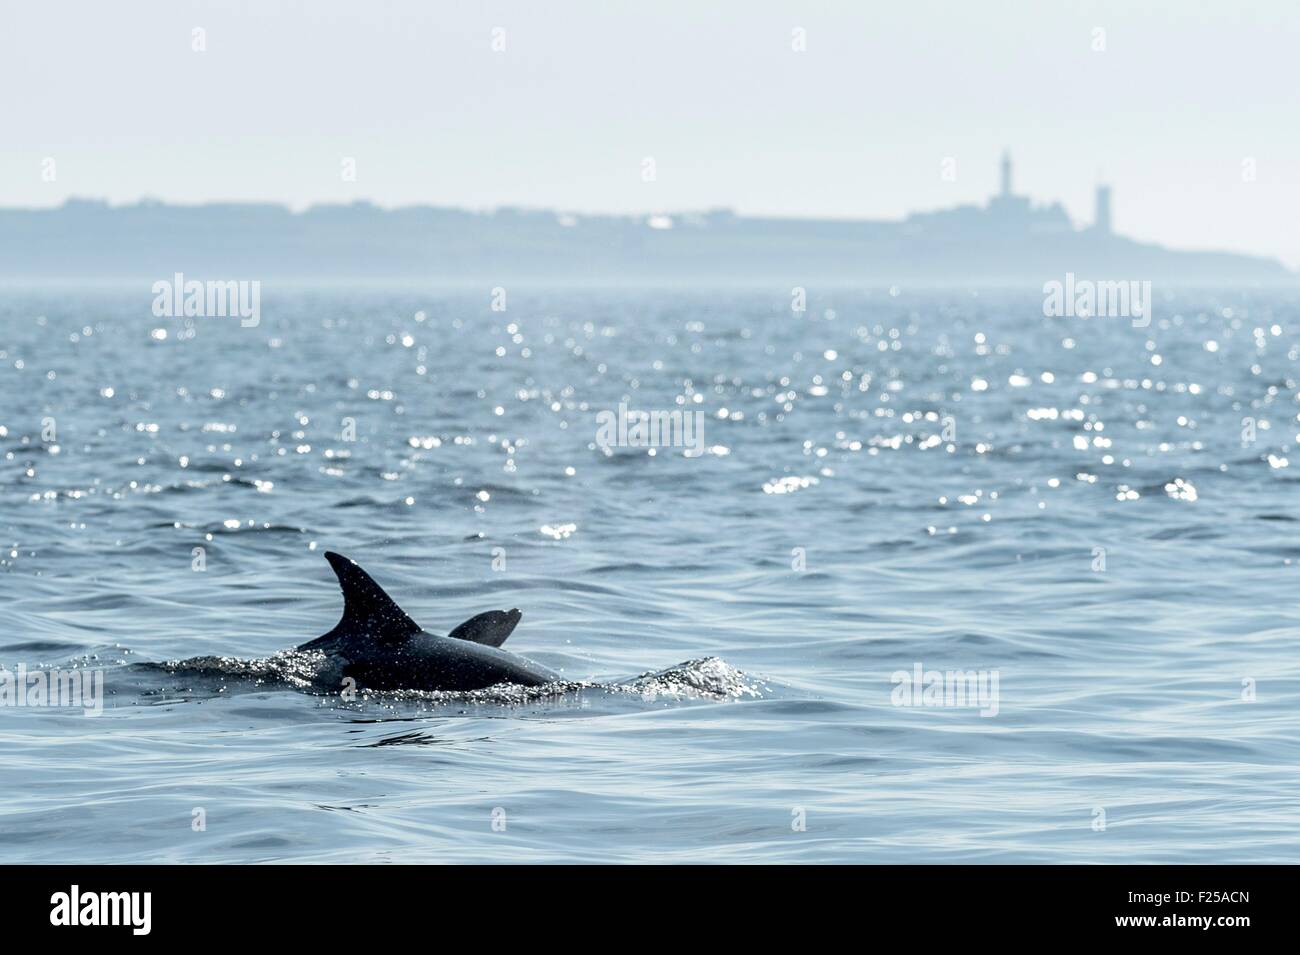 France, Finistere, Le Conquet, Common bottlenose dolphin (Tursiops truncatus) in Iroise sea Stock Photo